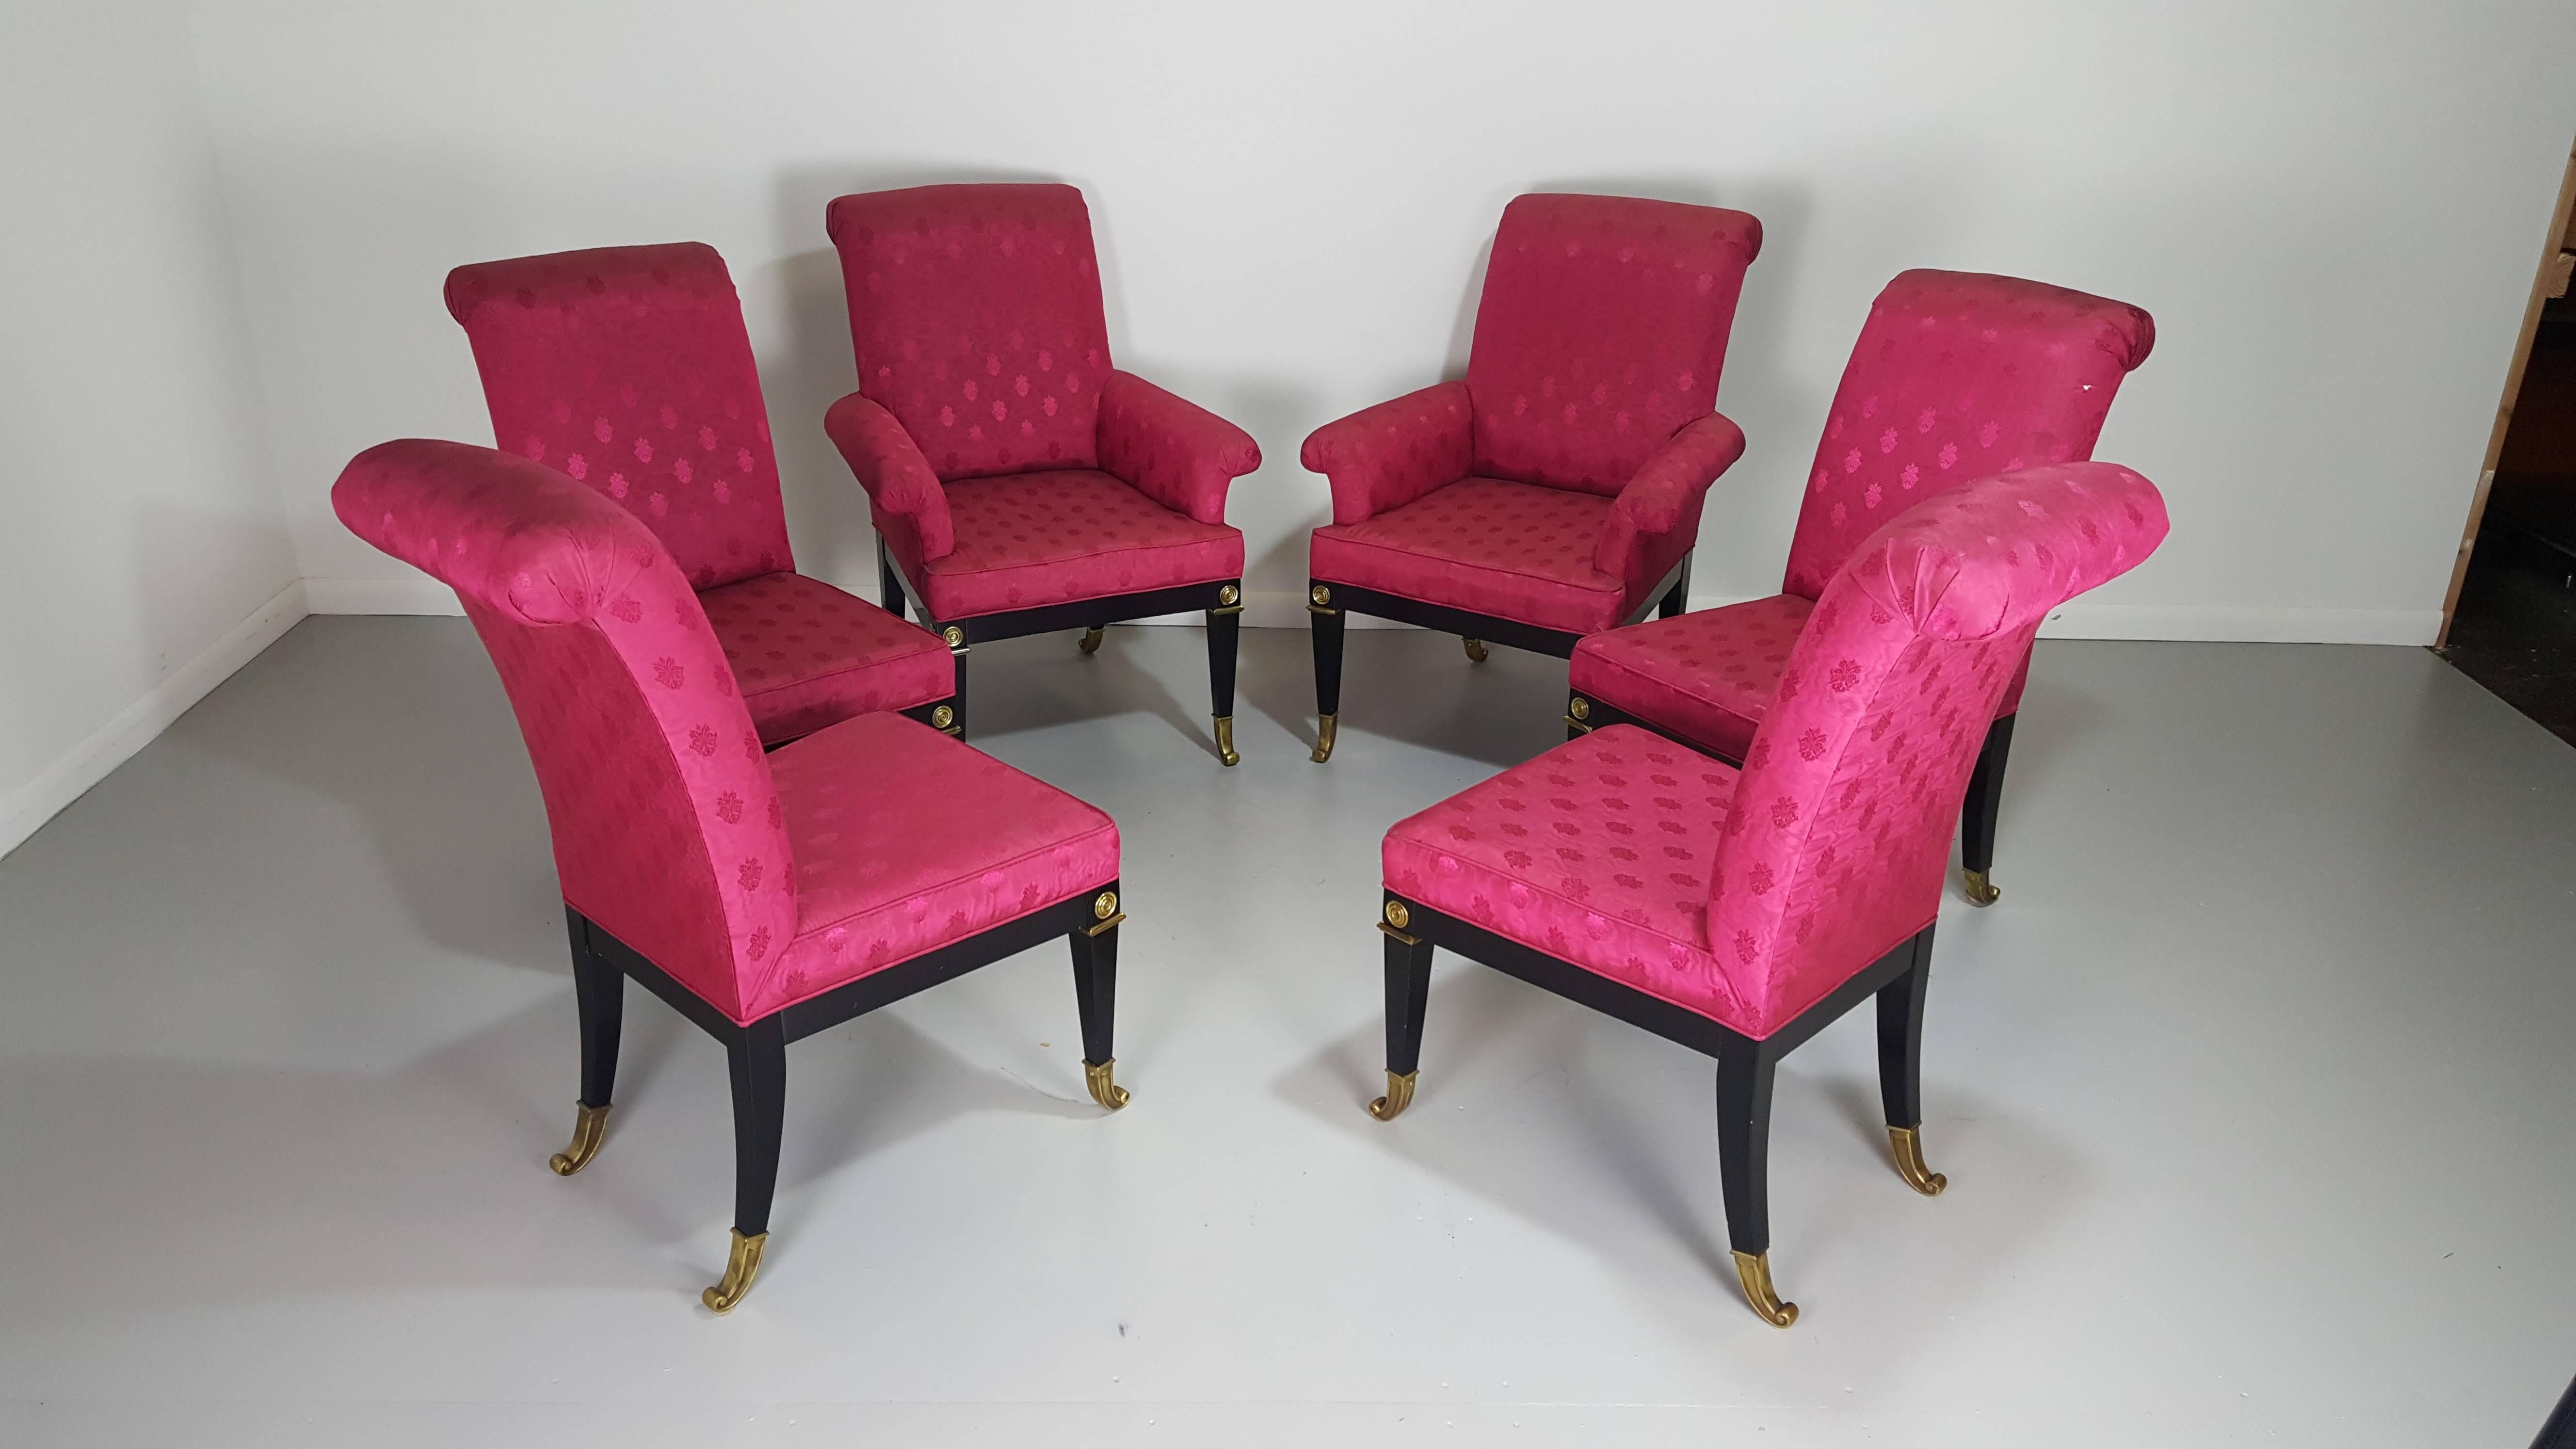 Late 20th Century Incredible Neoclassical Lacquer and Brass Dining Chairs by Mastercraft, 1970s